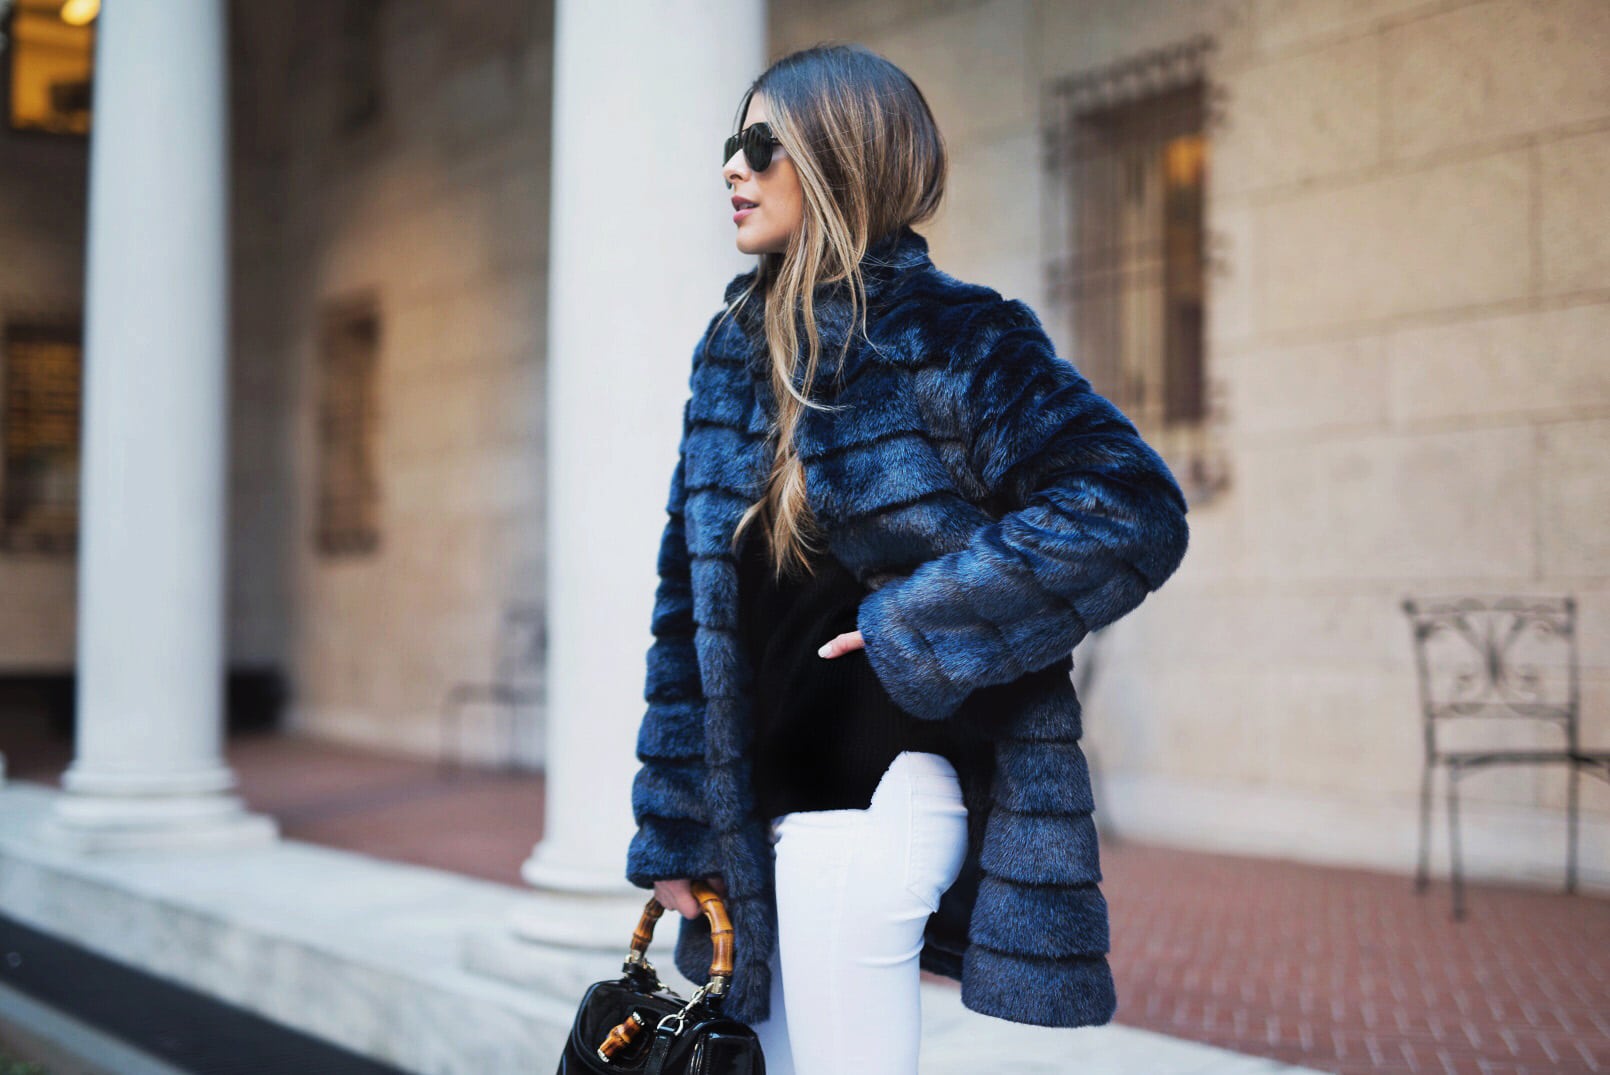 A Chic Faux Fur Coat for Fall + Winter